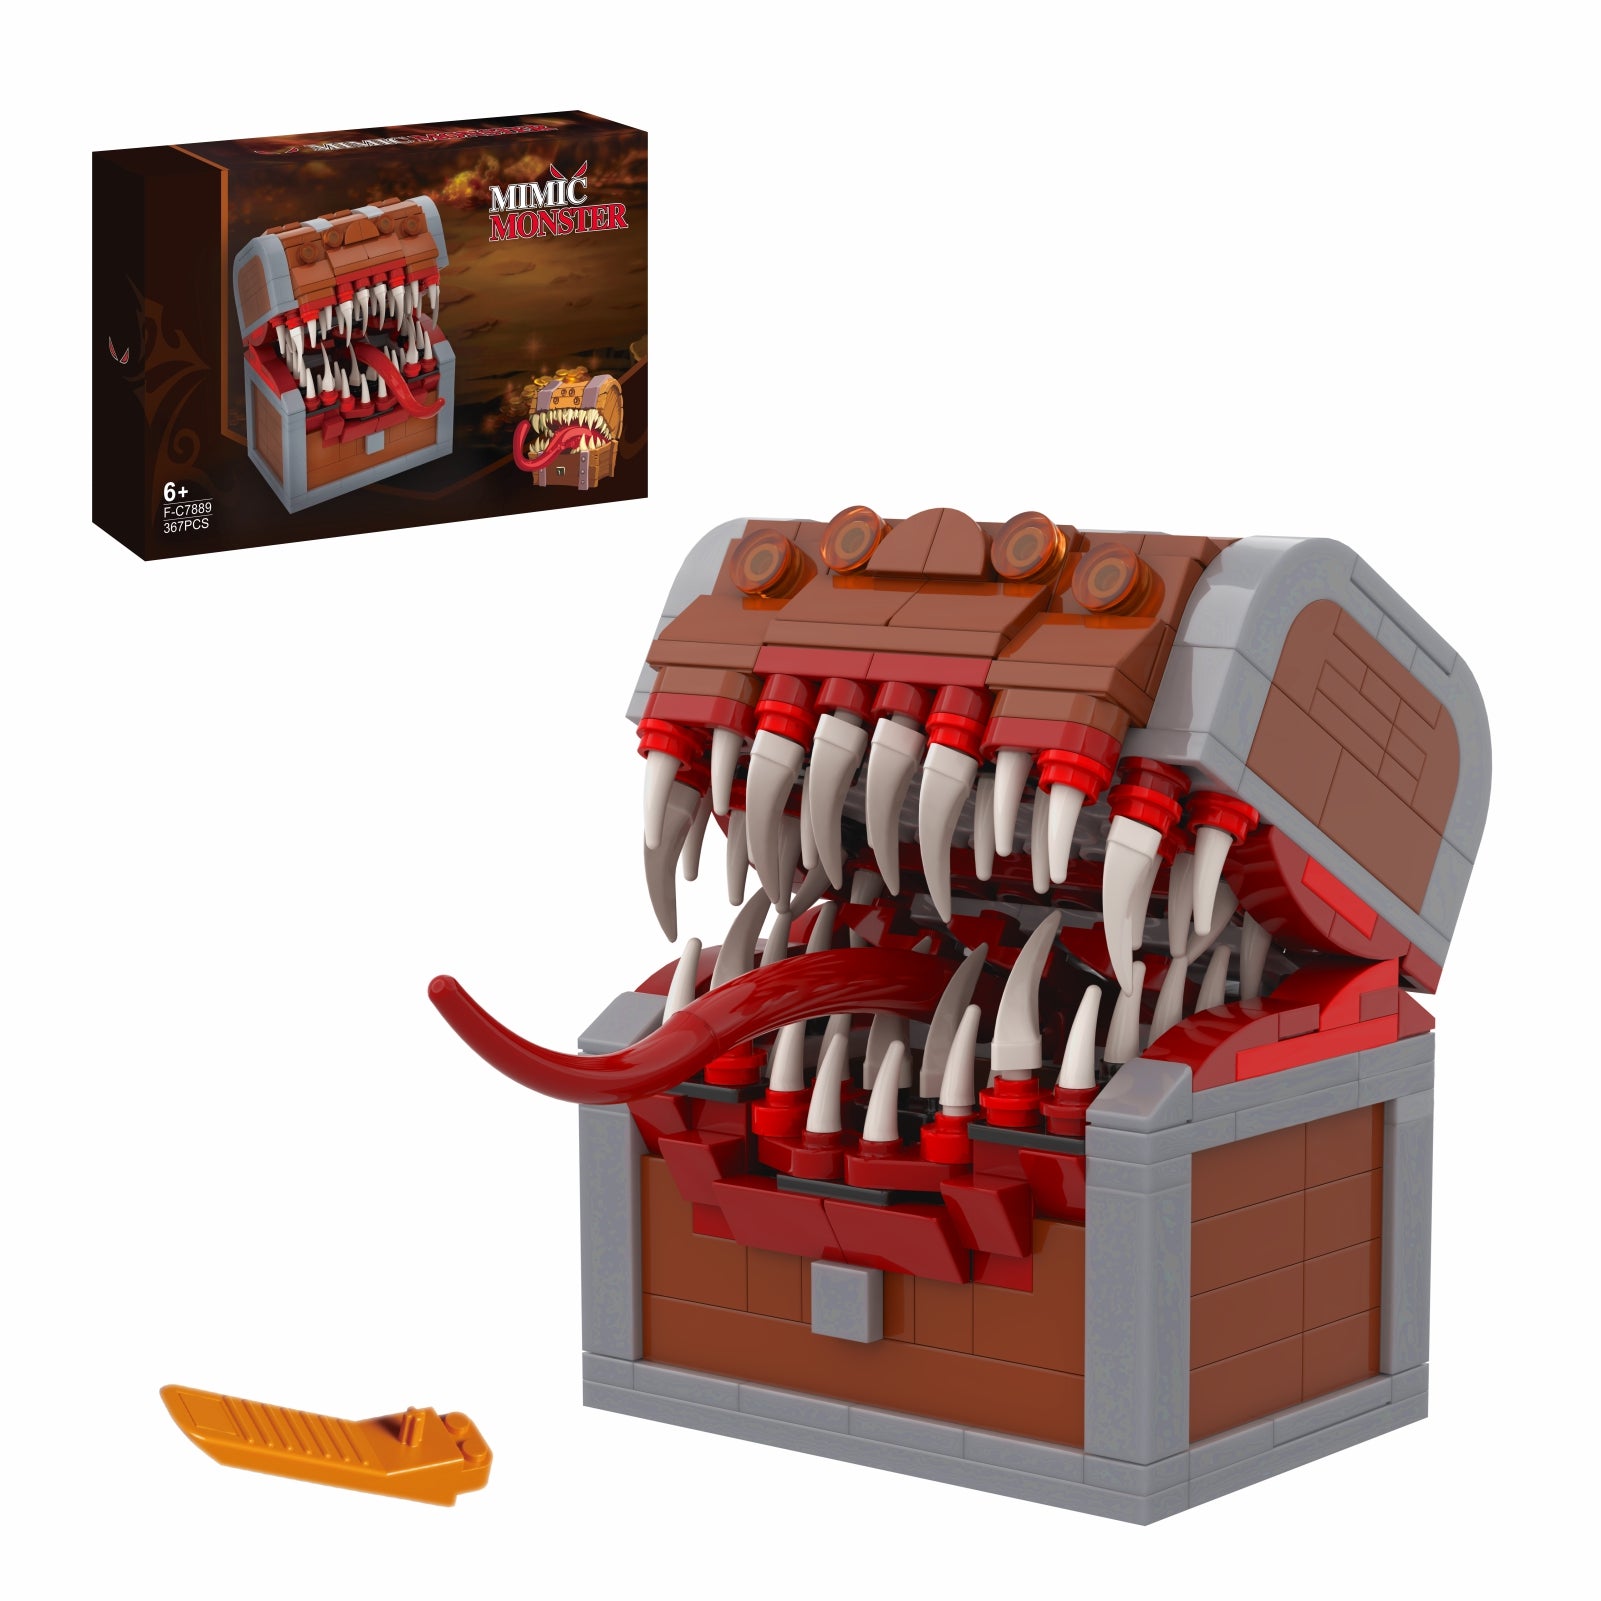 LEGO gifts-with-purchase have a new, clearer box design